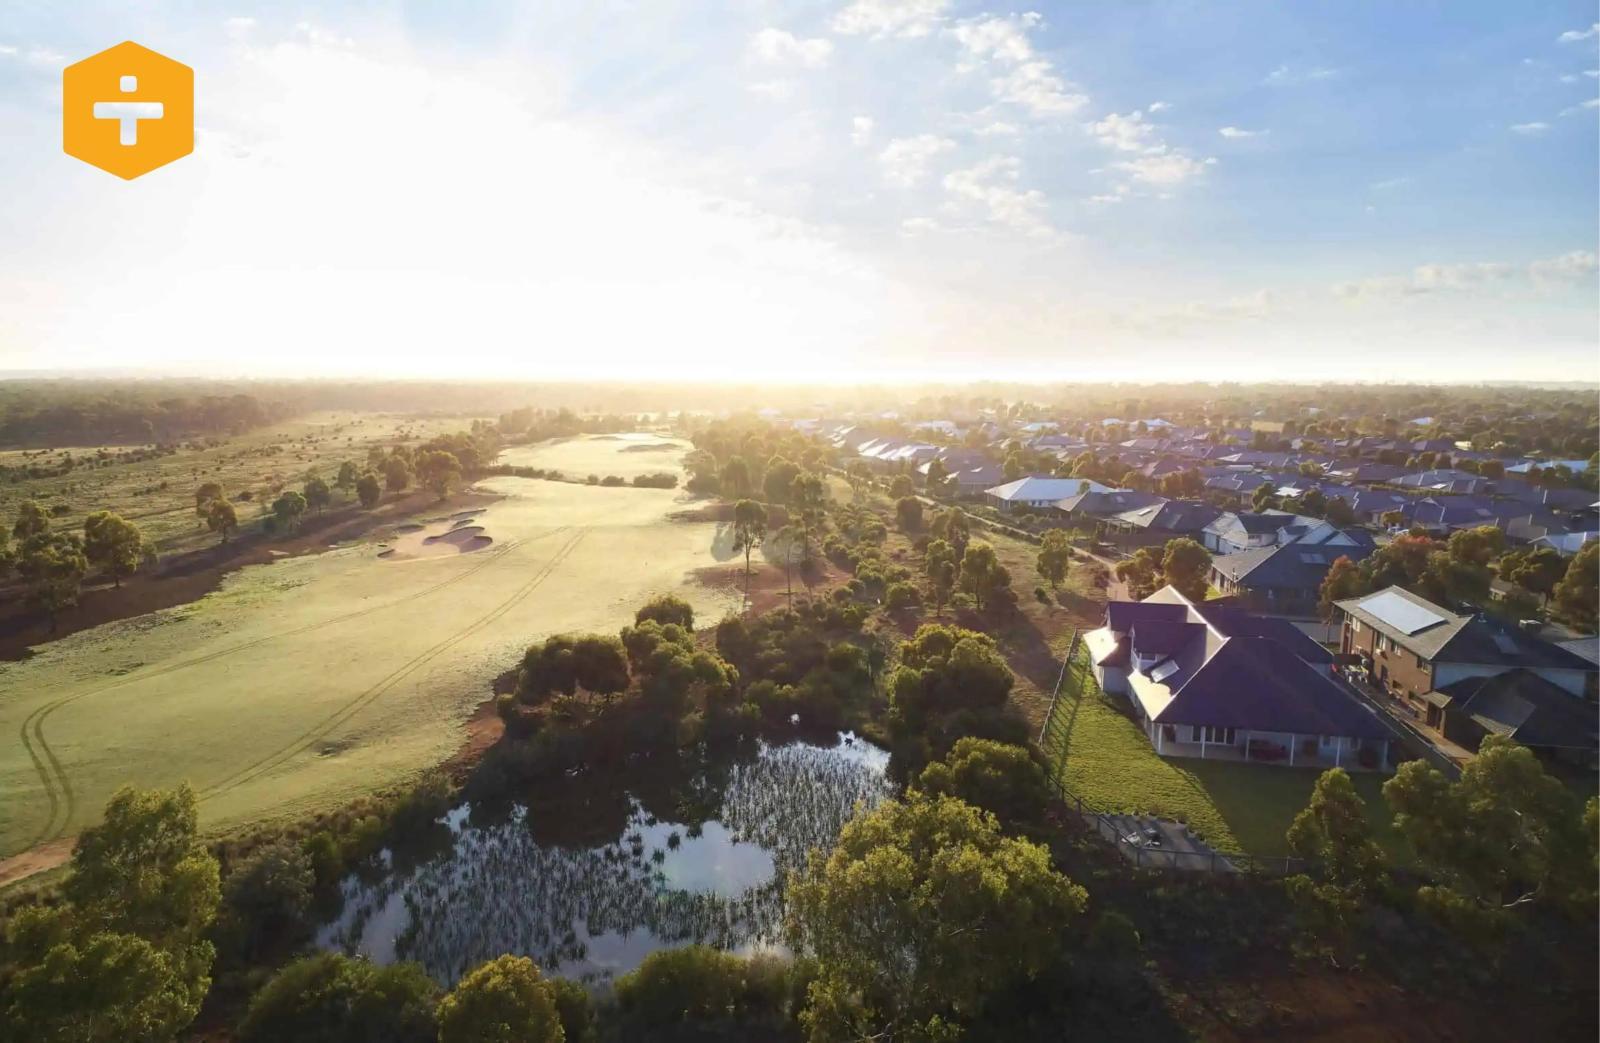 Eynesbury near Melbourne in Victoria is one of the locations where developer Resimax is providing detached housing for rent through the build-to-rent model for tenants.